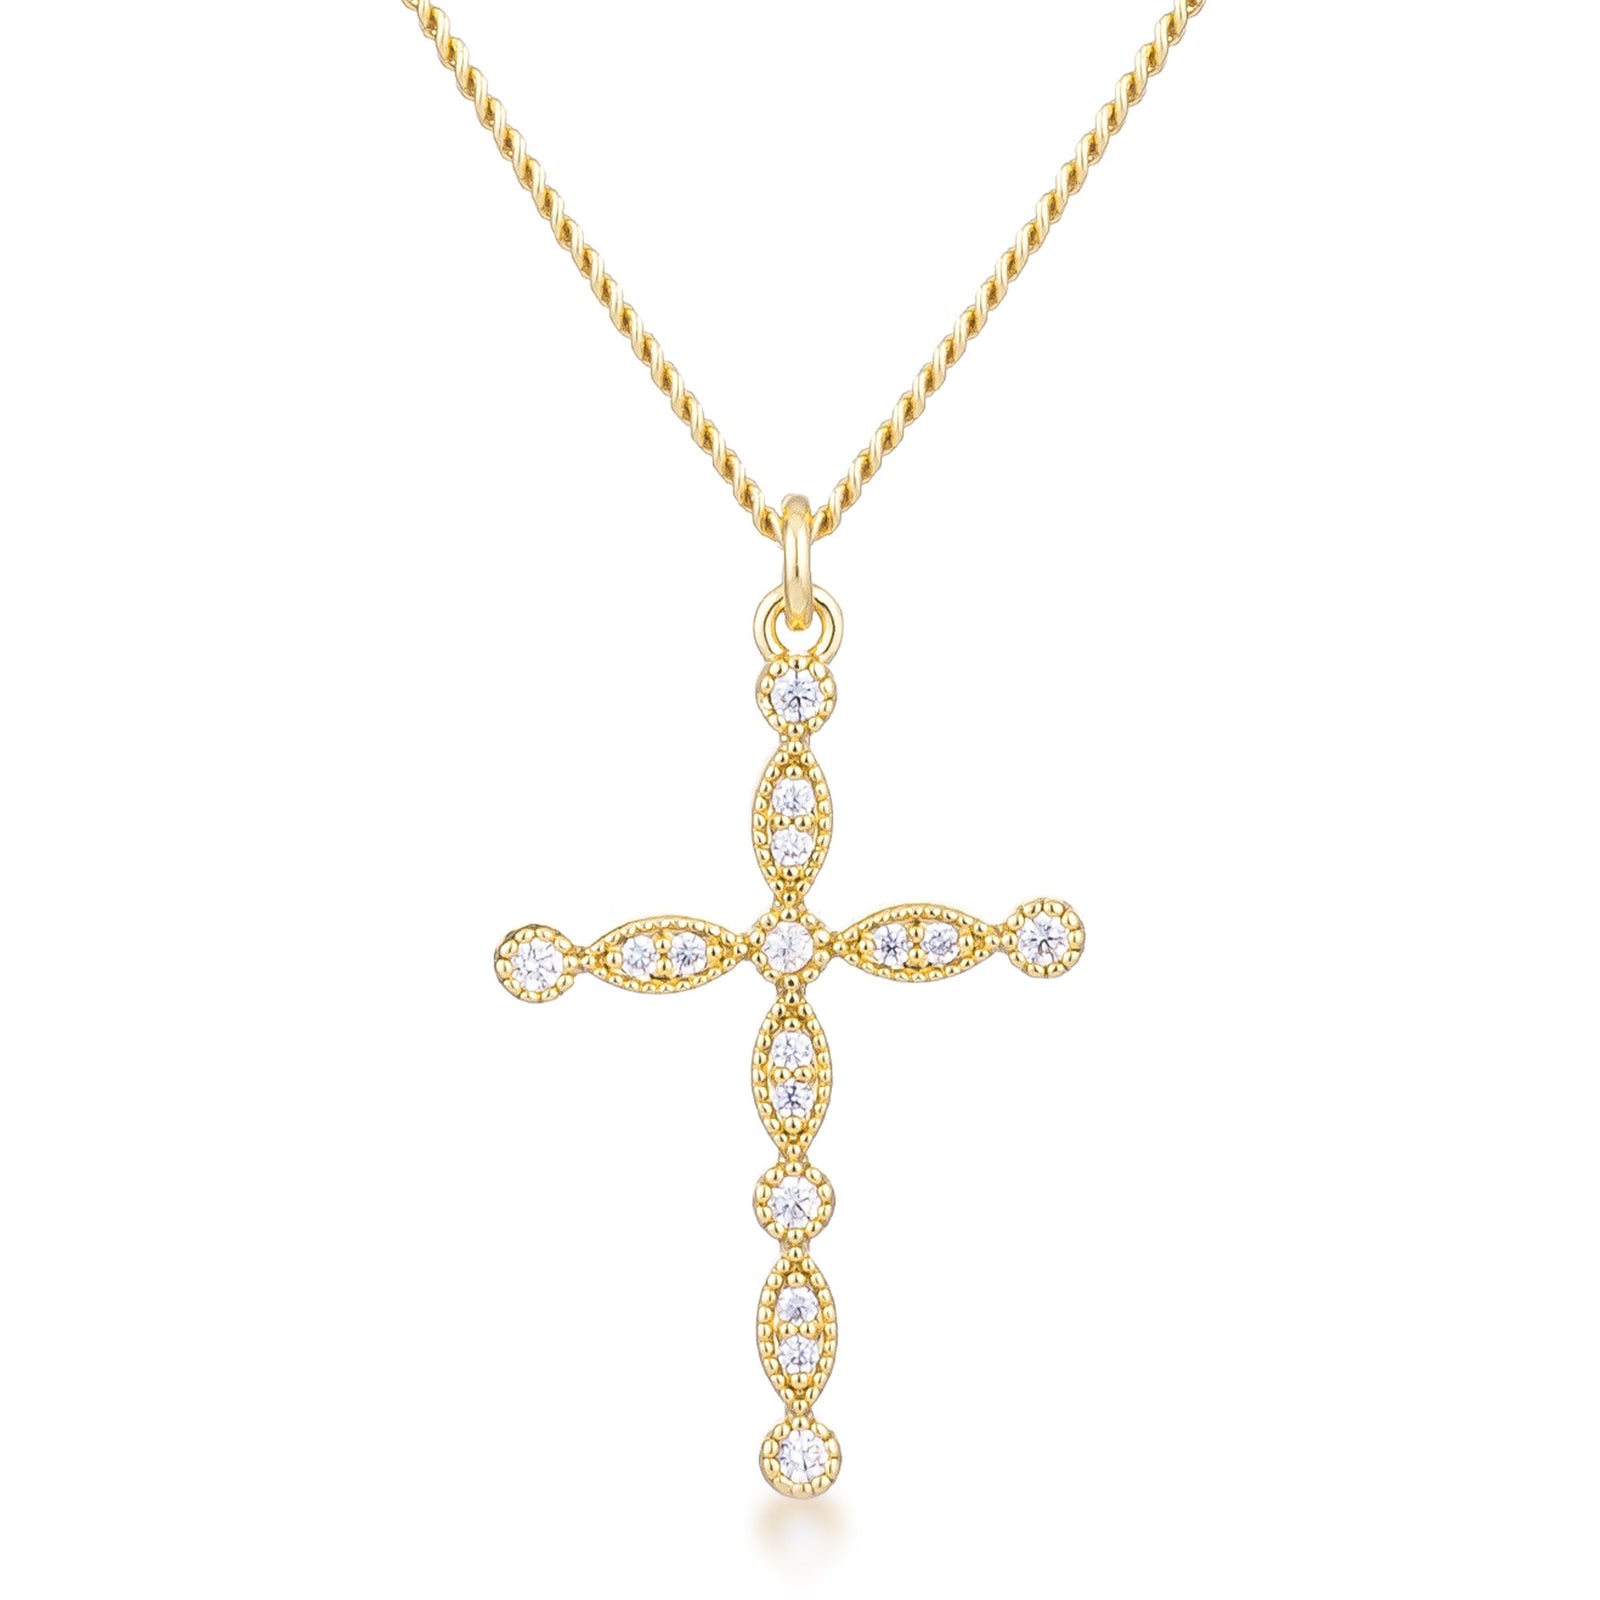 Delicate Vintage Gold Plated Clear CZ Cross Pendant